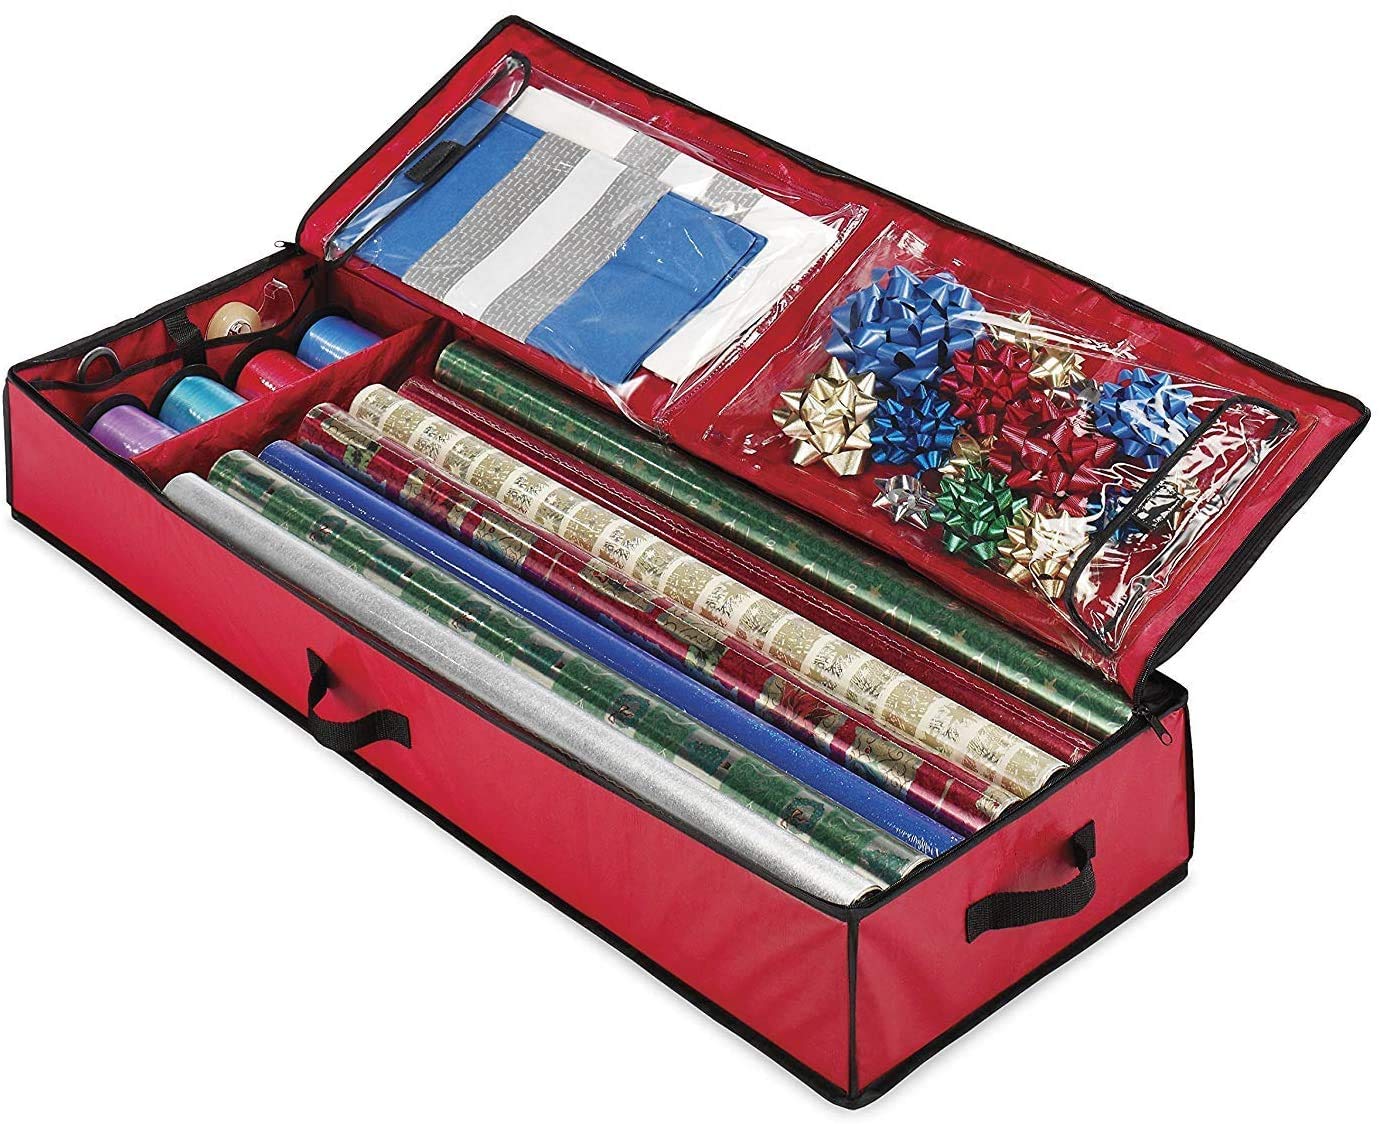 Whitmor Giftwrap Organizer – Space Saving and Storage Solution for Wrapping Paper, Ribbons, Craft Supplies and More (Red)  - Like New